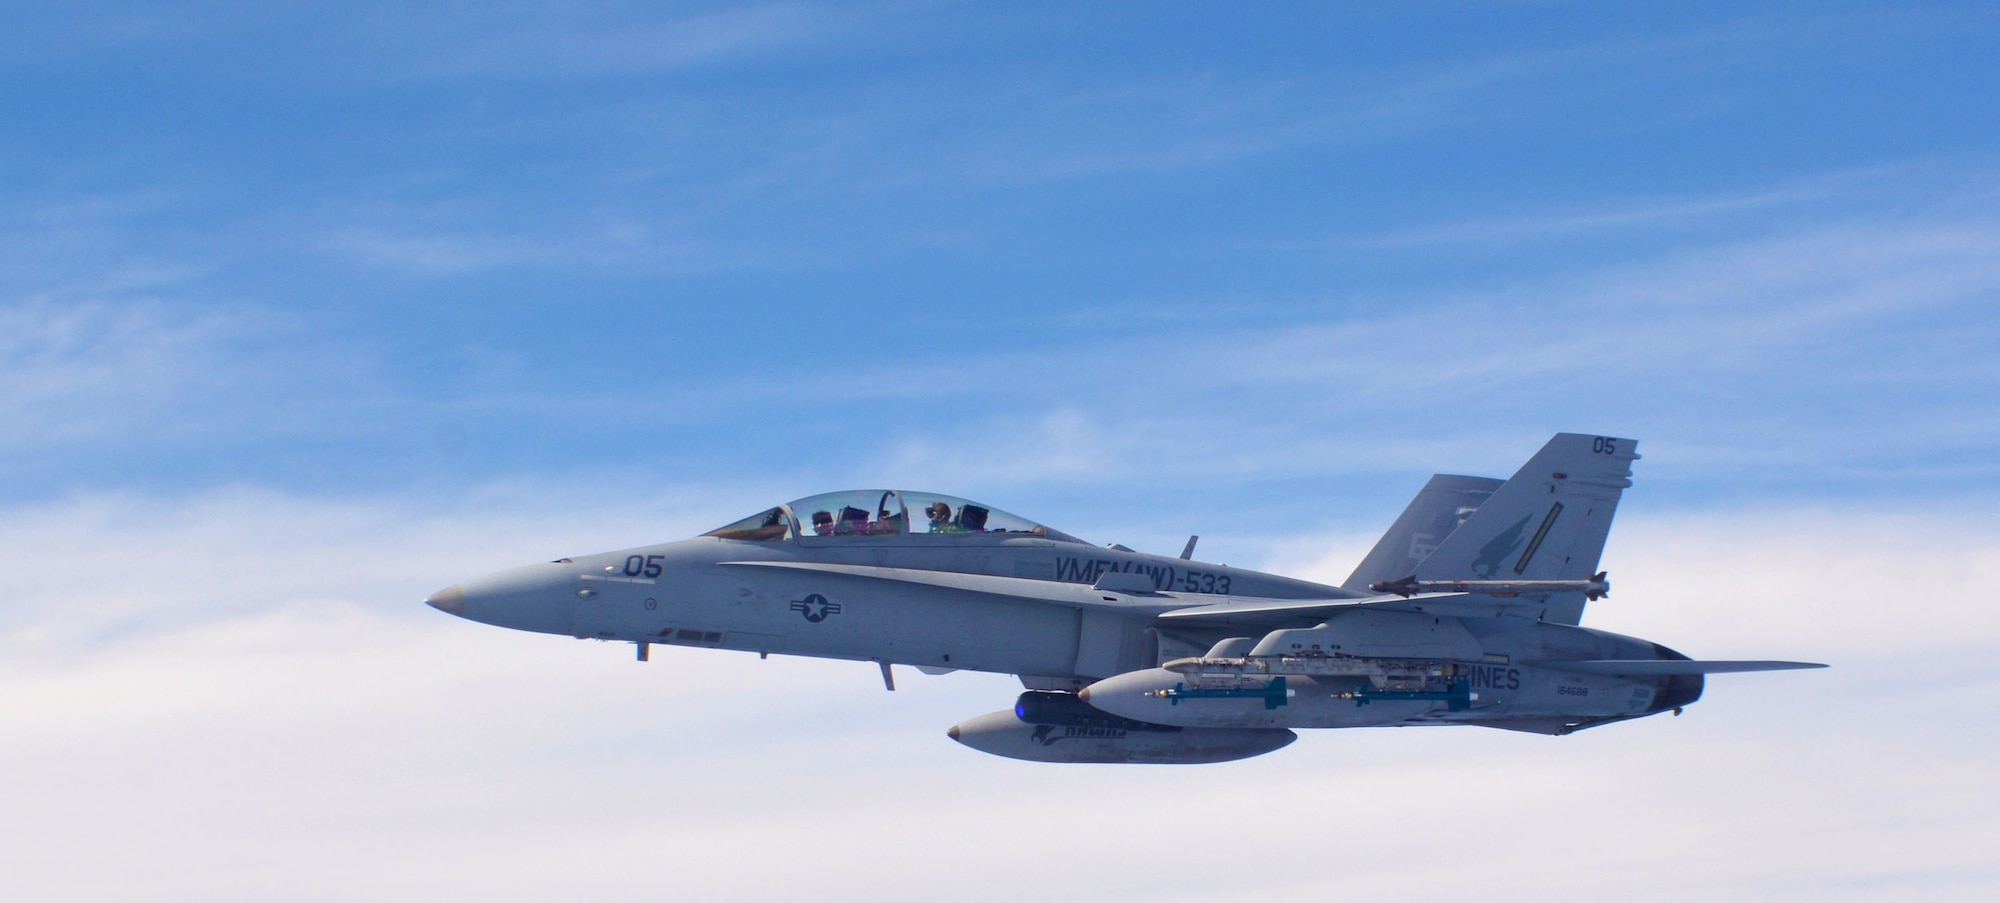 A U.S. Marine Corps F/A-18 Super Hornet from the Marine All-Weather Fighter Attack Squadron 533, based out of Marine Corps Air Station Beaufort, South Carolina, flies over the Pacific Ocean alongside a 507th Air Refueling Wing KC-135R Stratotanker from Tinker Air Force Base, Oklahoma, during the Rim of the Pacific (RIMPAC) exercise, July 10. Twenty-five nations, 46 ships, five submarines, and about 200 aircraft and 25,000 personnel are participating in RIMPAC from June 27 to Aug. 2 in and around the Hawaiian Islands and Southern California. The world’s largest international maritime exercise, RIMPAC provides a unique training opportunity while fostering and sustaining cooperative relationships among participants critical to ensuring the safety of sea lanes and security of the world’s oceans. RIMPAC 2018 is the 26th exercise in the series that began in 1971. (U.S. Air Force photo by Tech. Sgt. Samantha Mathison)